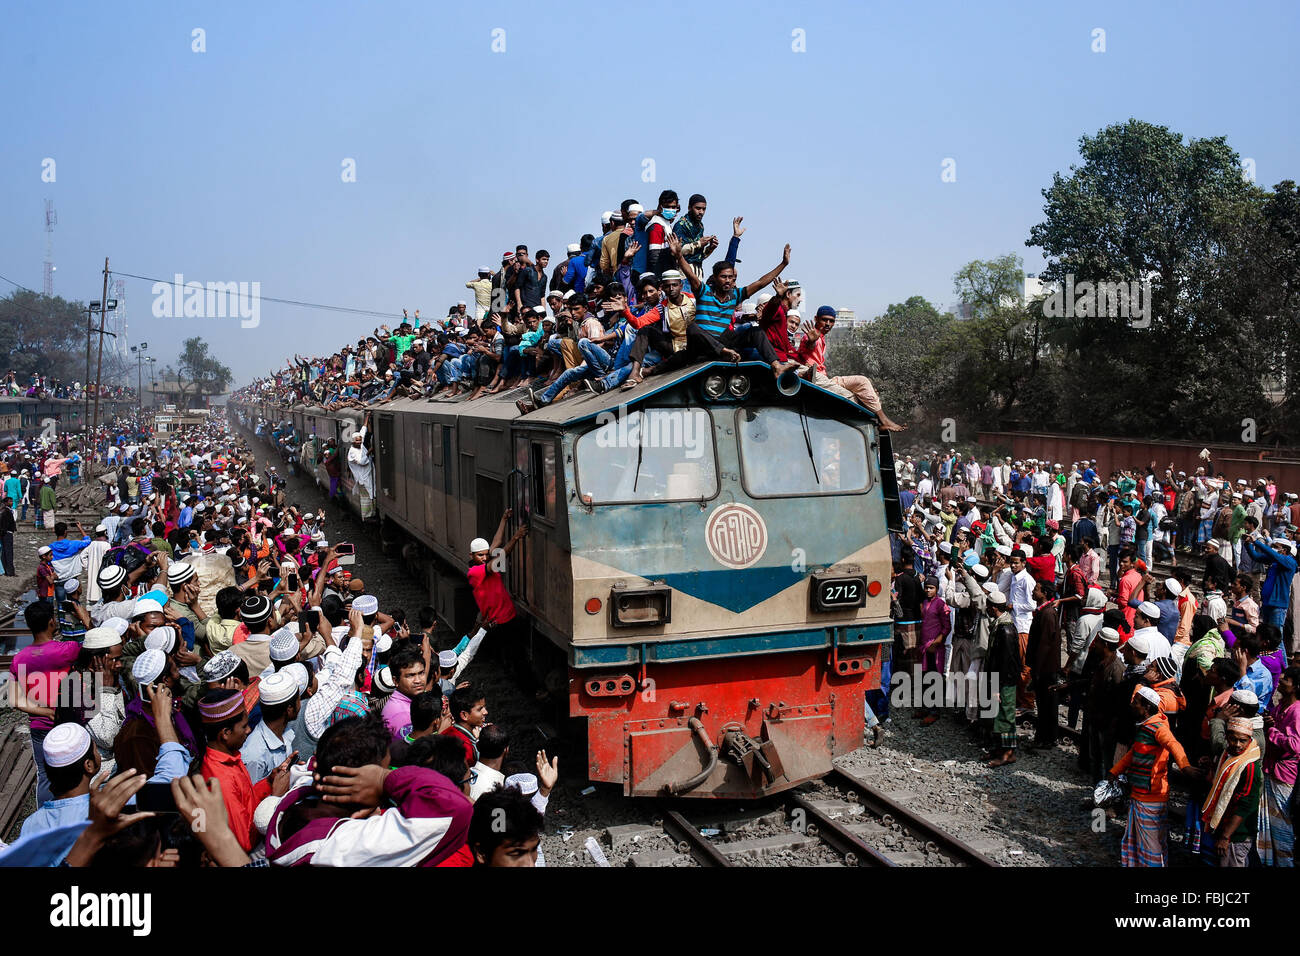 Jan. 17, 2016 - Gazipur, Bangladesh - Muslim devotees gathered in Bishwa Istema at Tongi, Gazipur for the last day of second phase of the event which is the second largest muslim congregation after Hajj. (Credit Image: © Mohammad Ponir Hossain via ZUMA Wire) Stock Photo